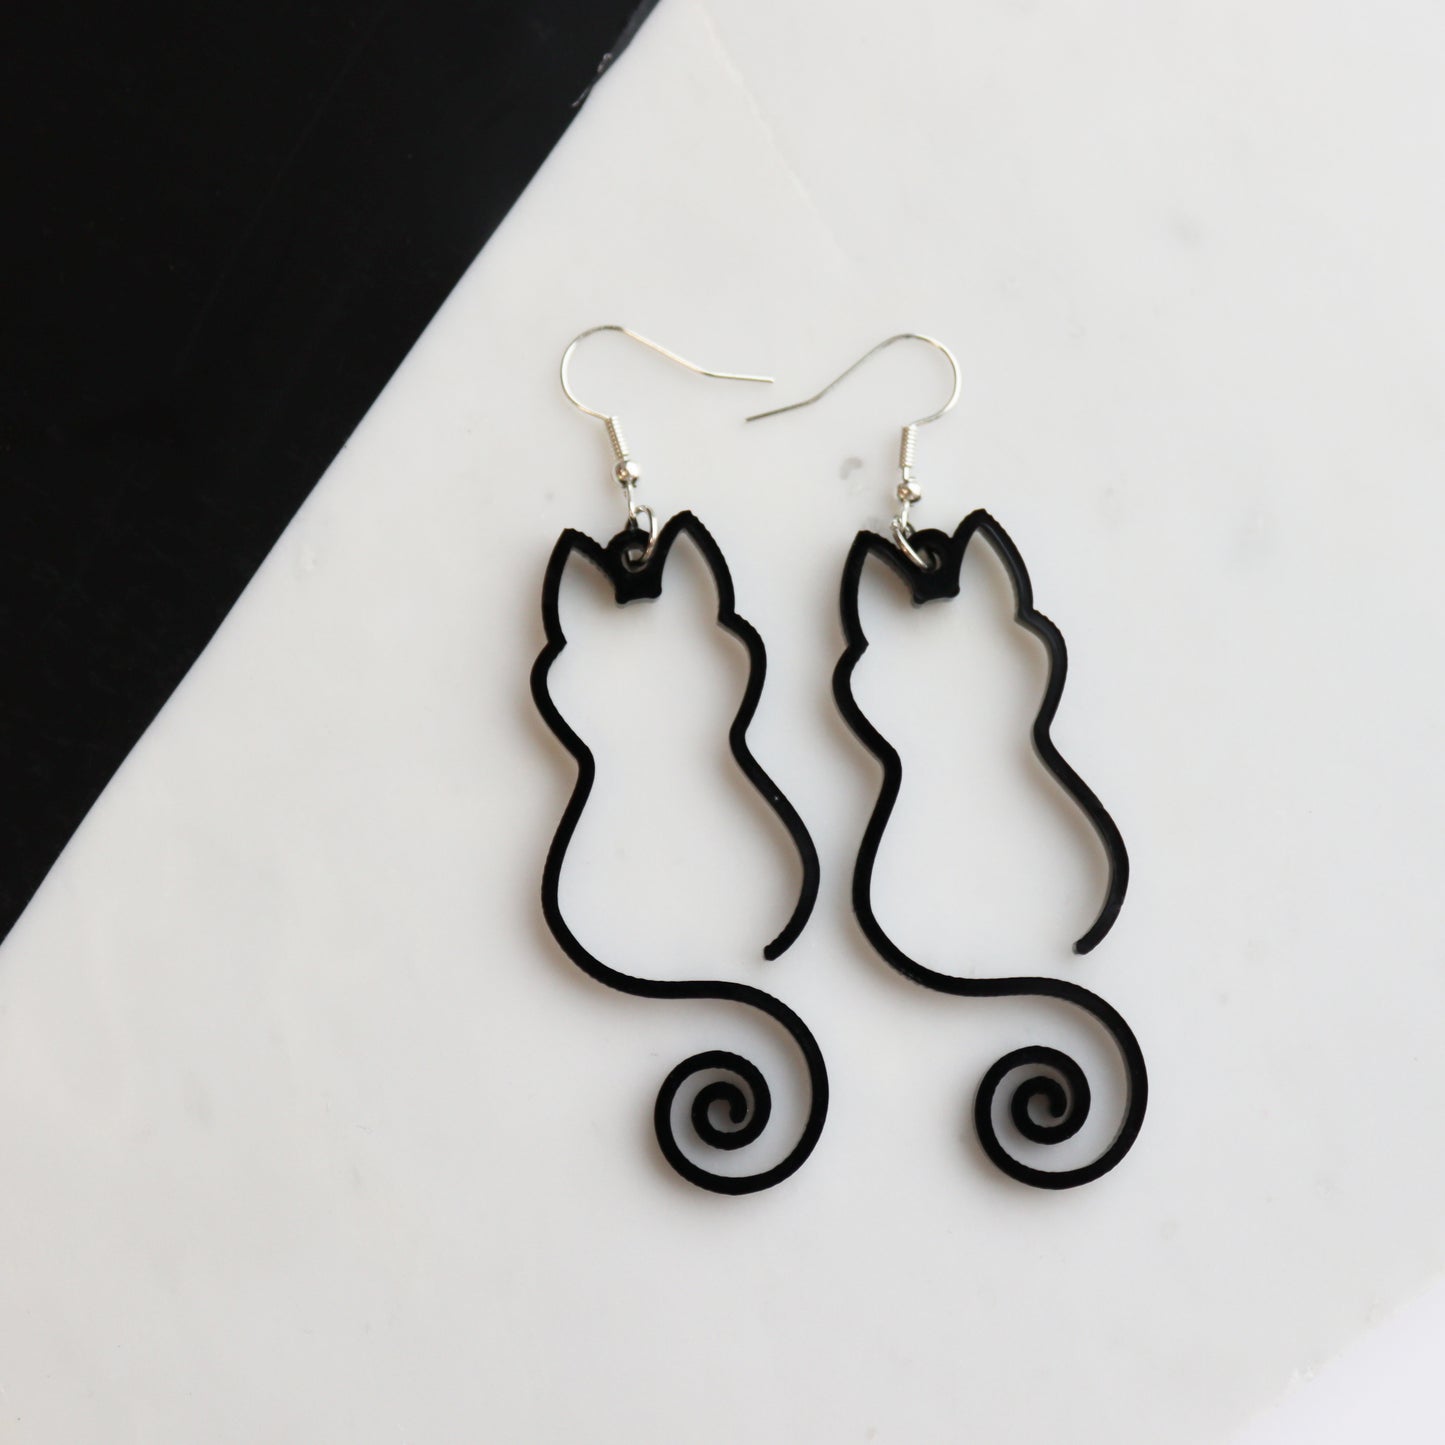 black cat outline pair of earrings acrylic outline cat earrings shown on white and black background